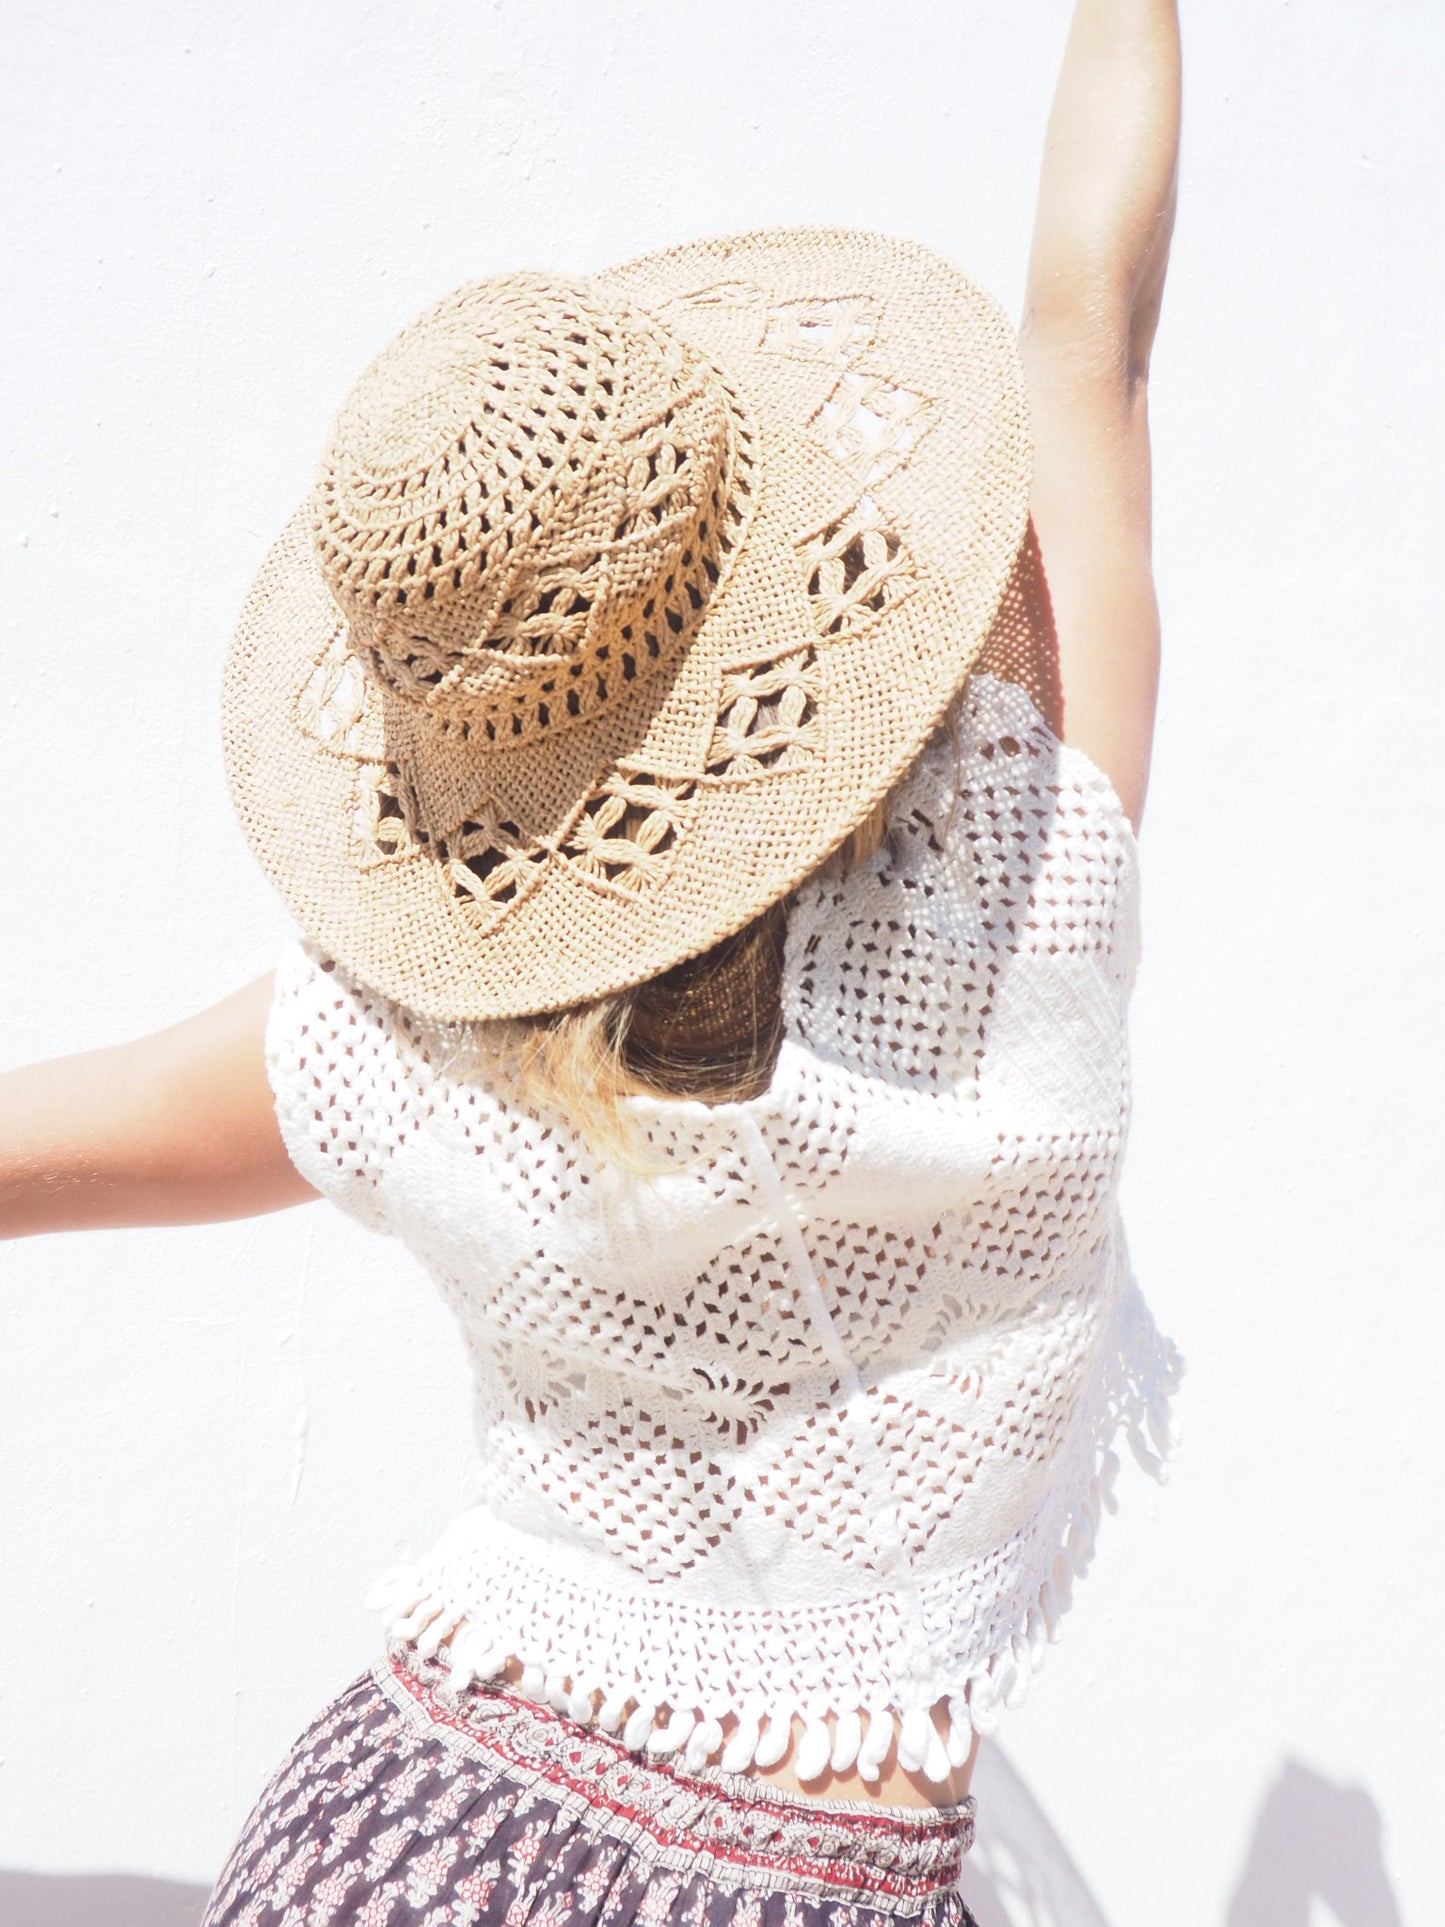 Super cute ivory and white vintage crochet top up-cycled by Vagabond Ibiza with cute tassel trim.